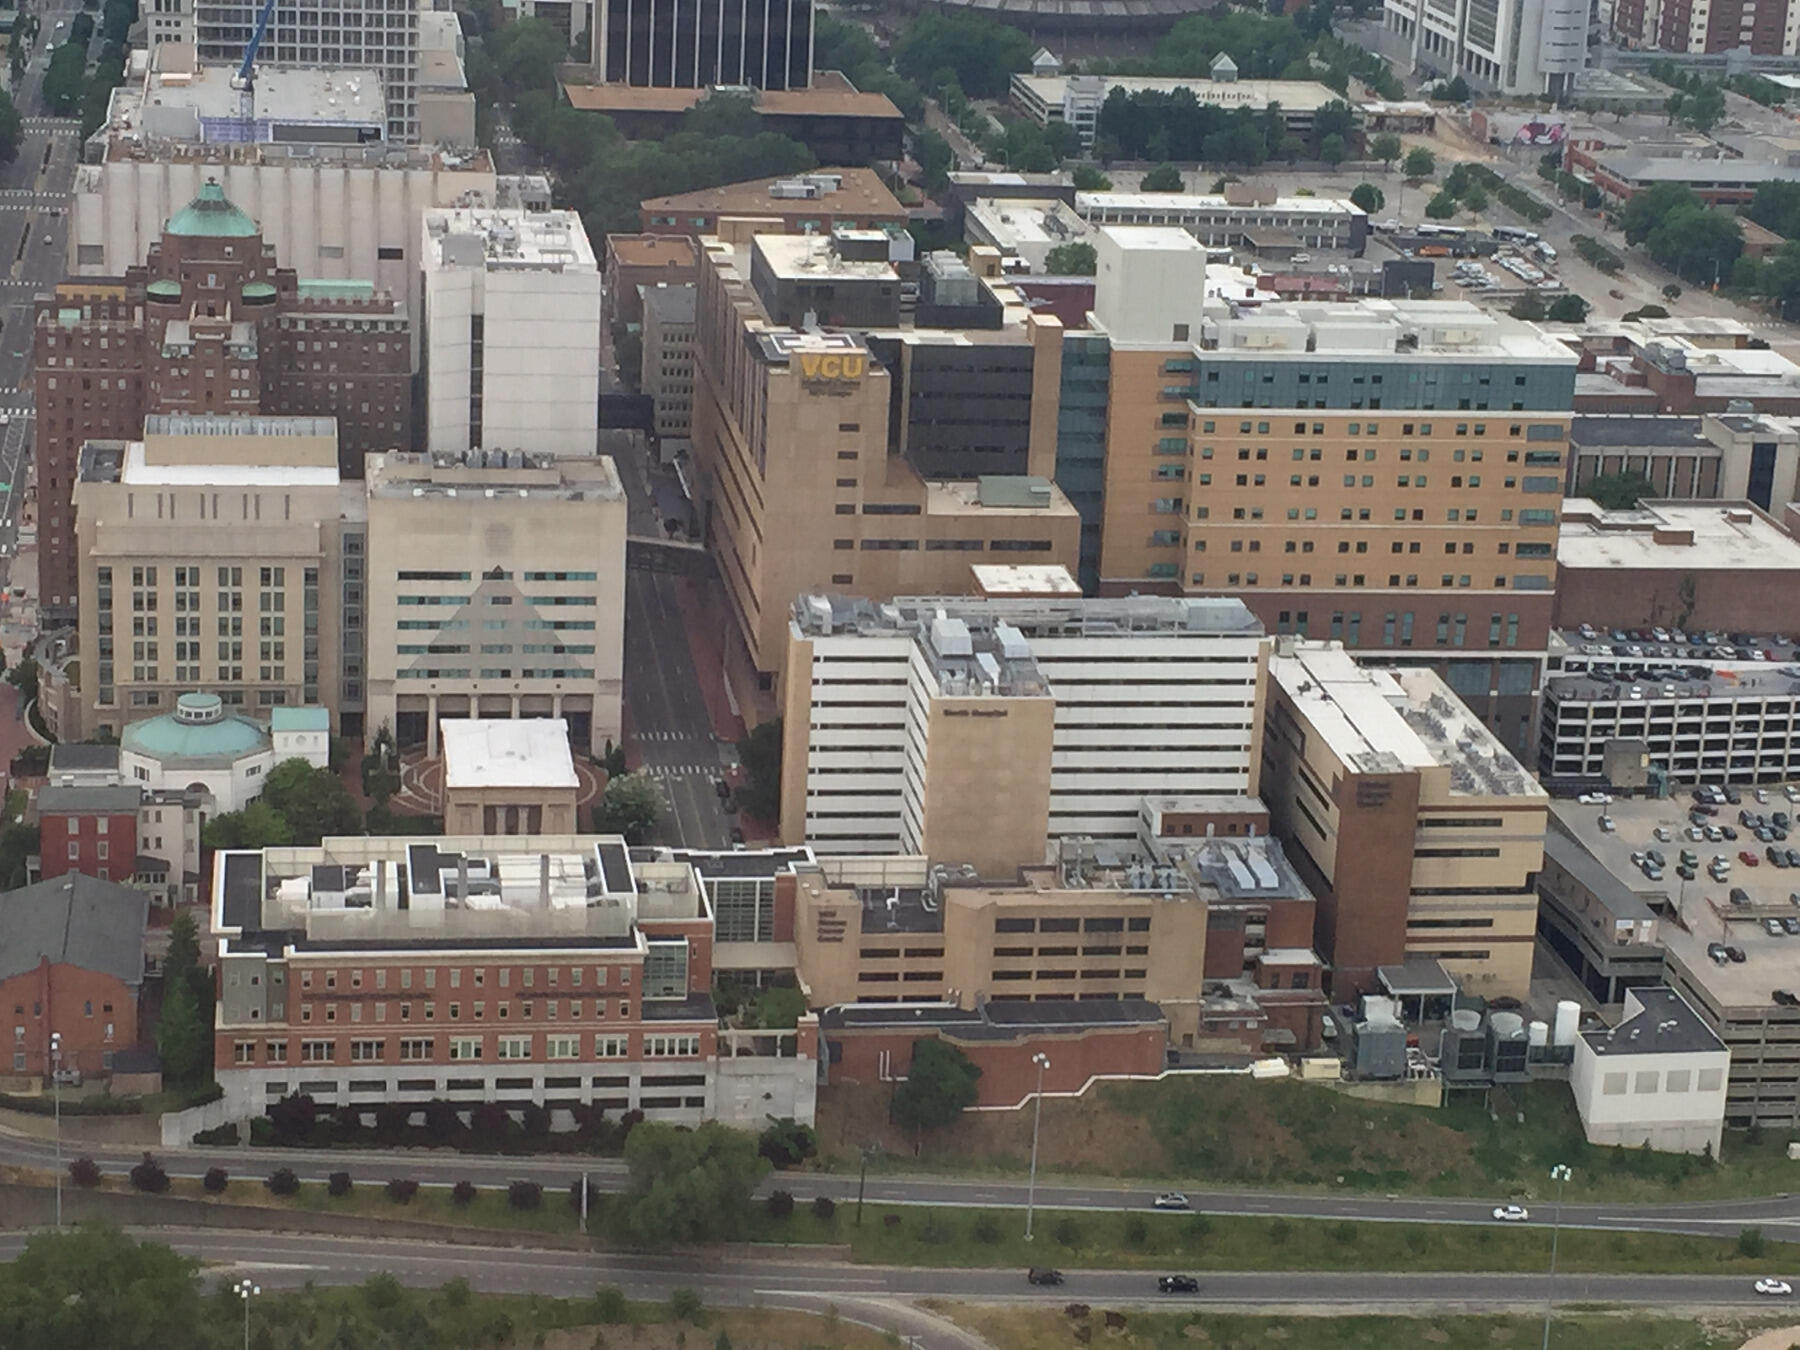 A view of downtown Richmond and VCU Medical Center from the helicopter.